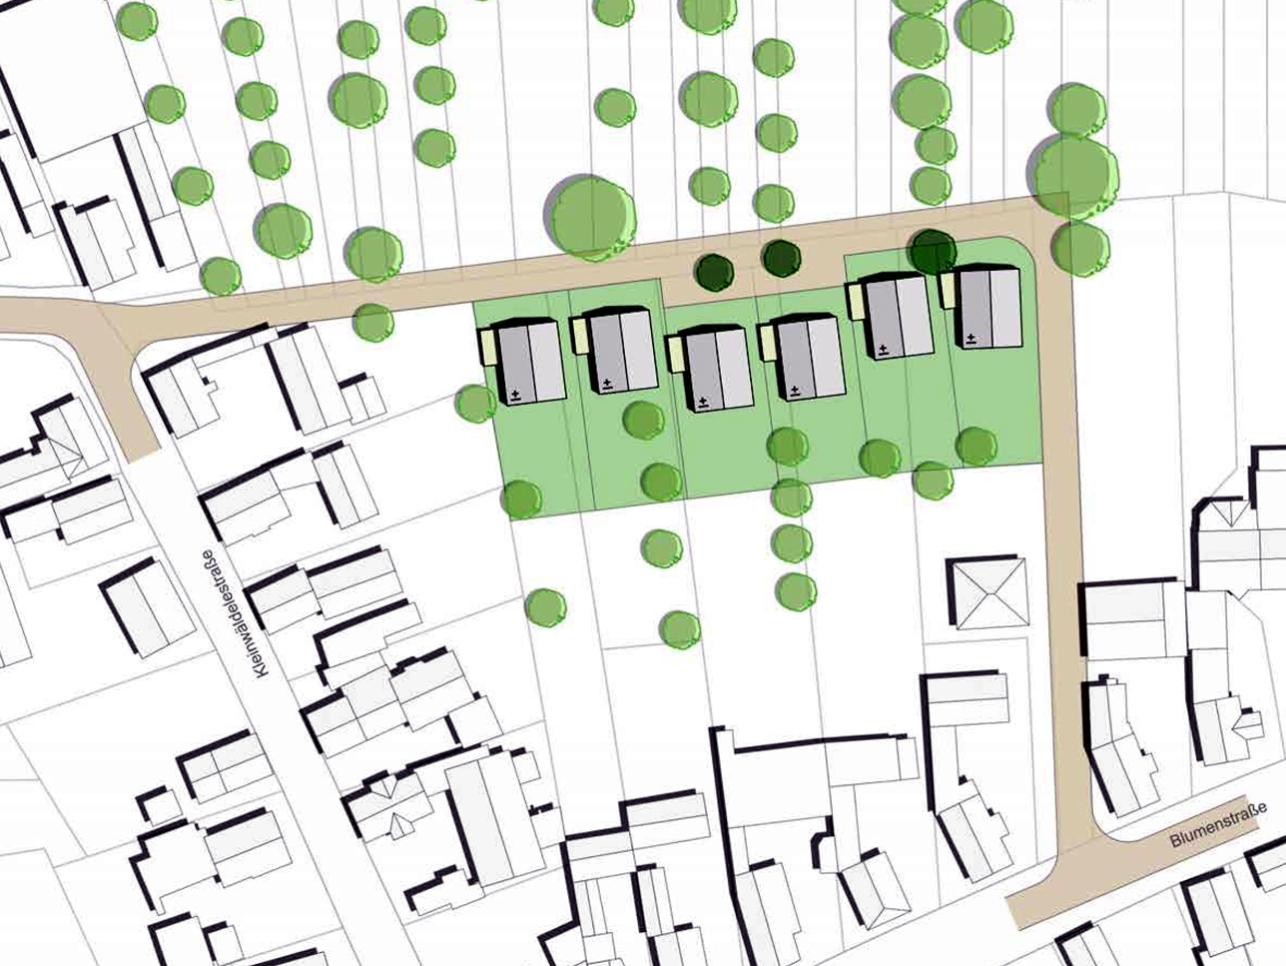 Graphic of new development on Blumenstraße Plittersdorf with trees, houses and streets